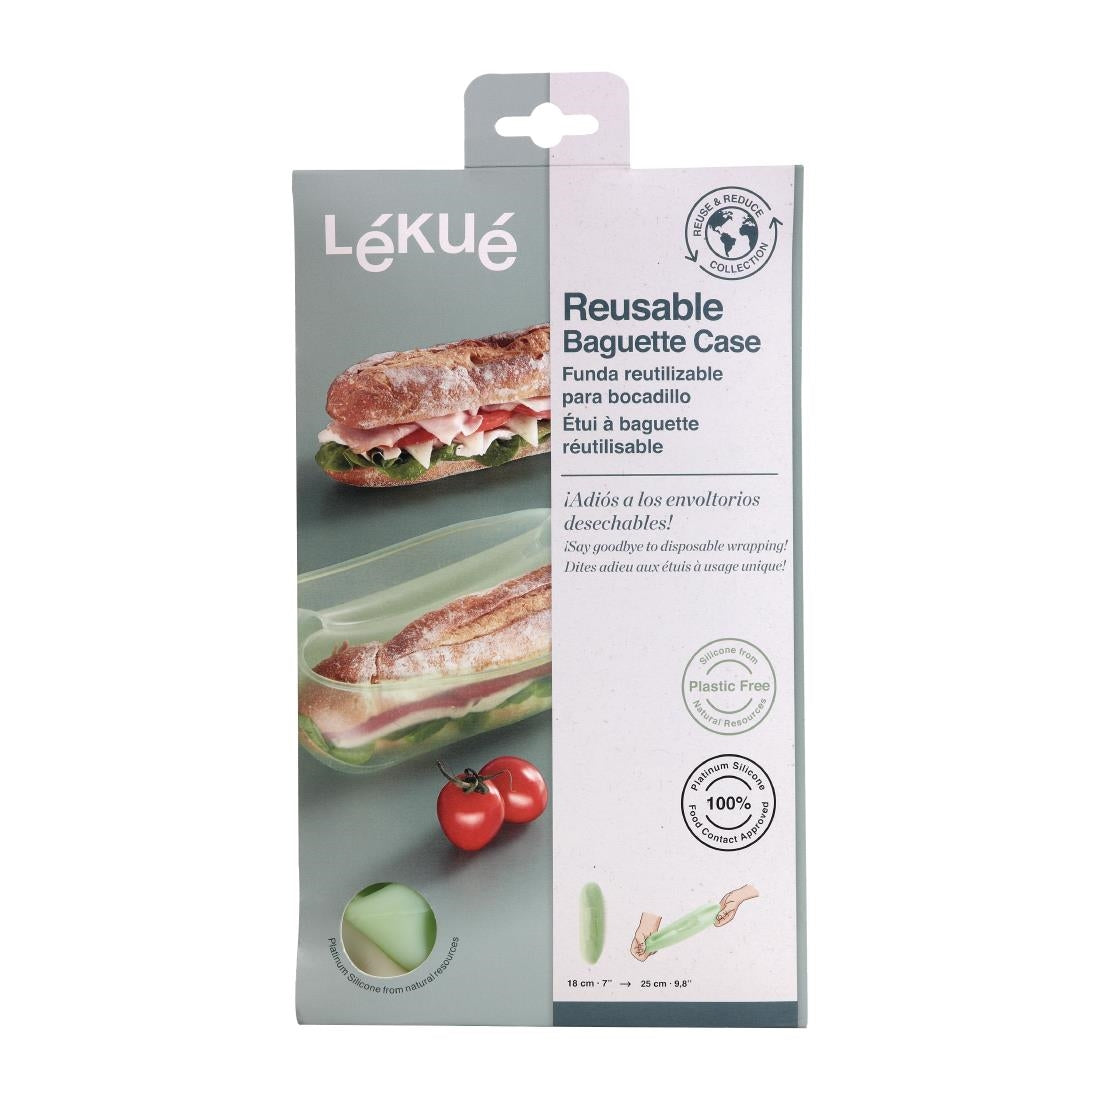 FS299 Lekue Reusable Silicone Baguette Case JD Catering Equipment Solutions Ltd